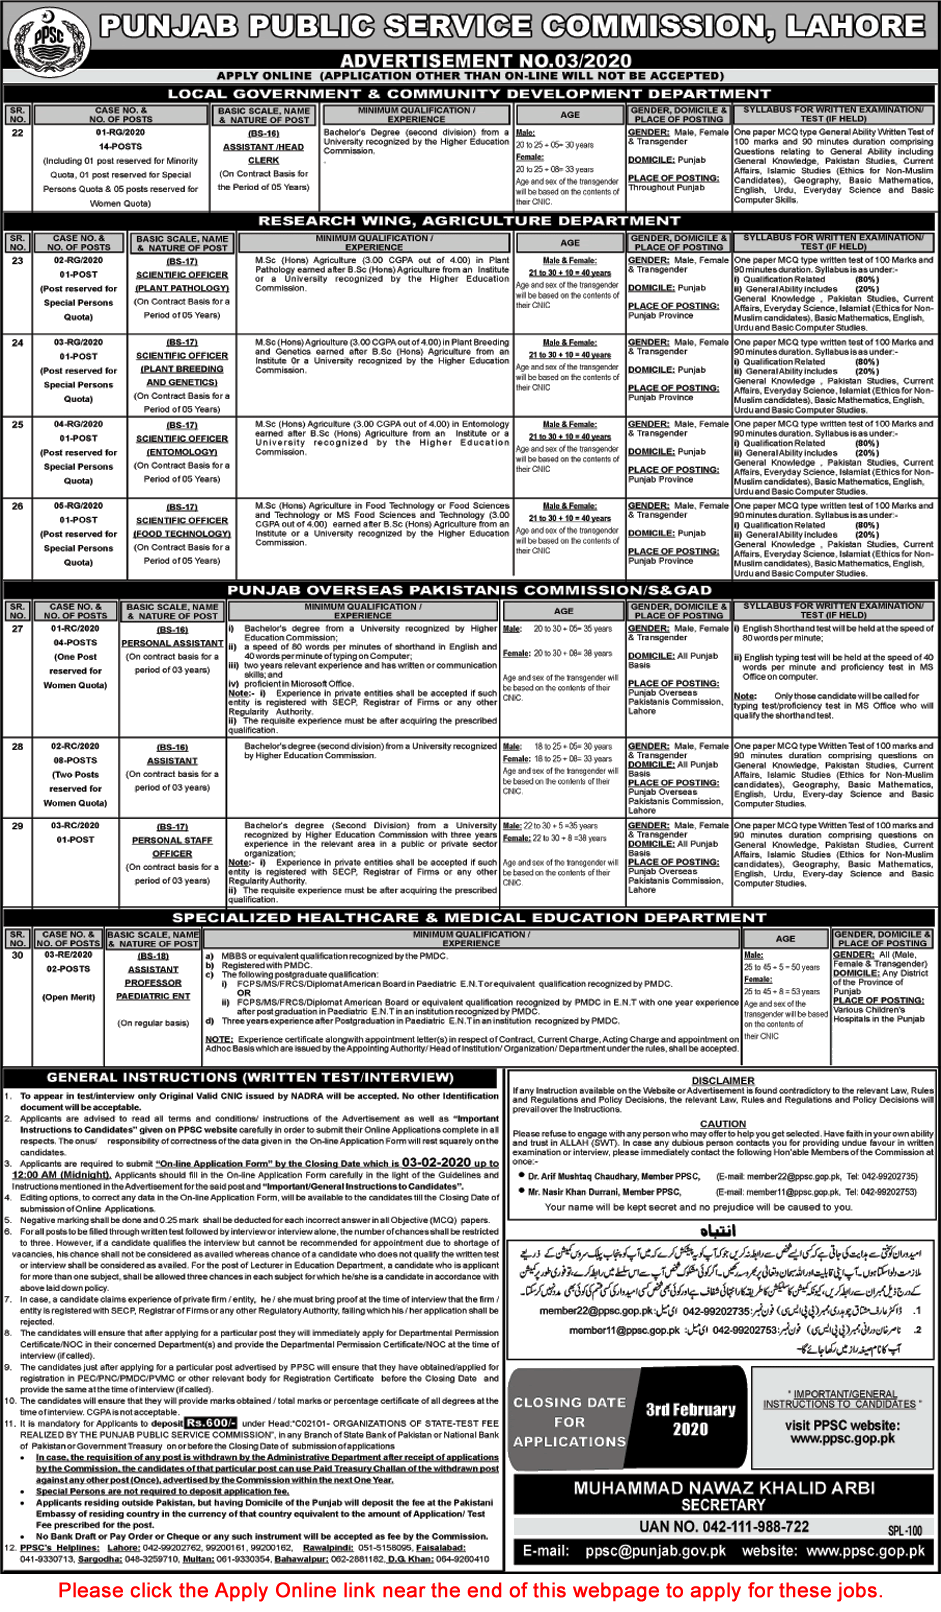 PPSC Jobs 2020 January Apply Online Consolidated Advertisement No 03/2020 3/2020 Latest